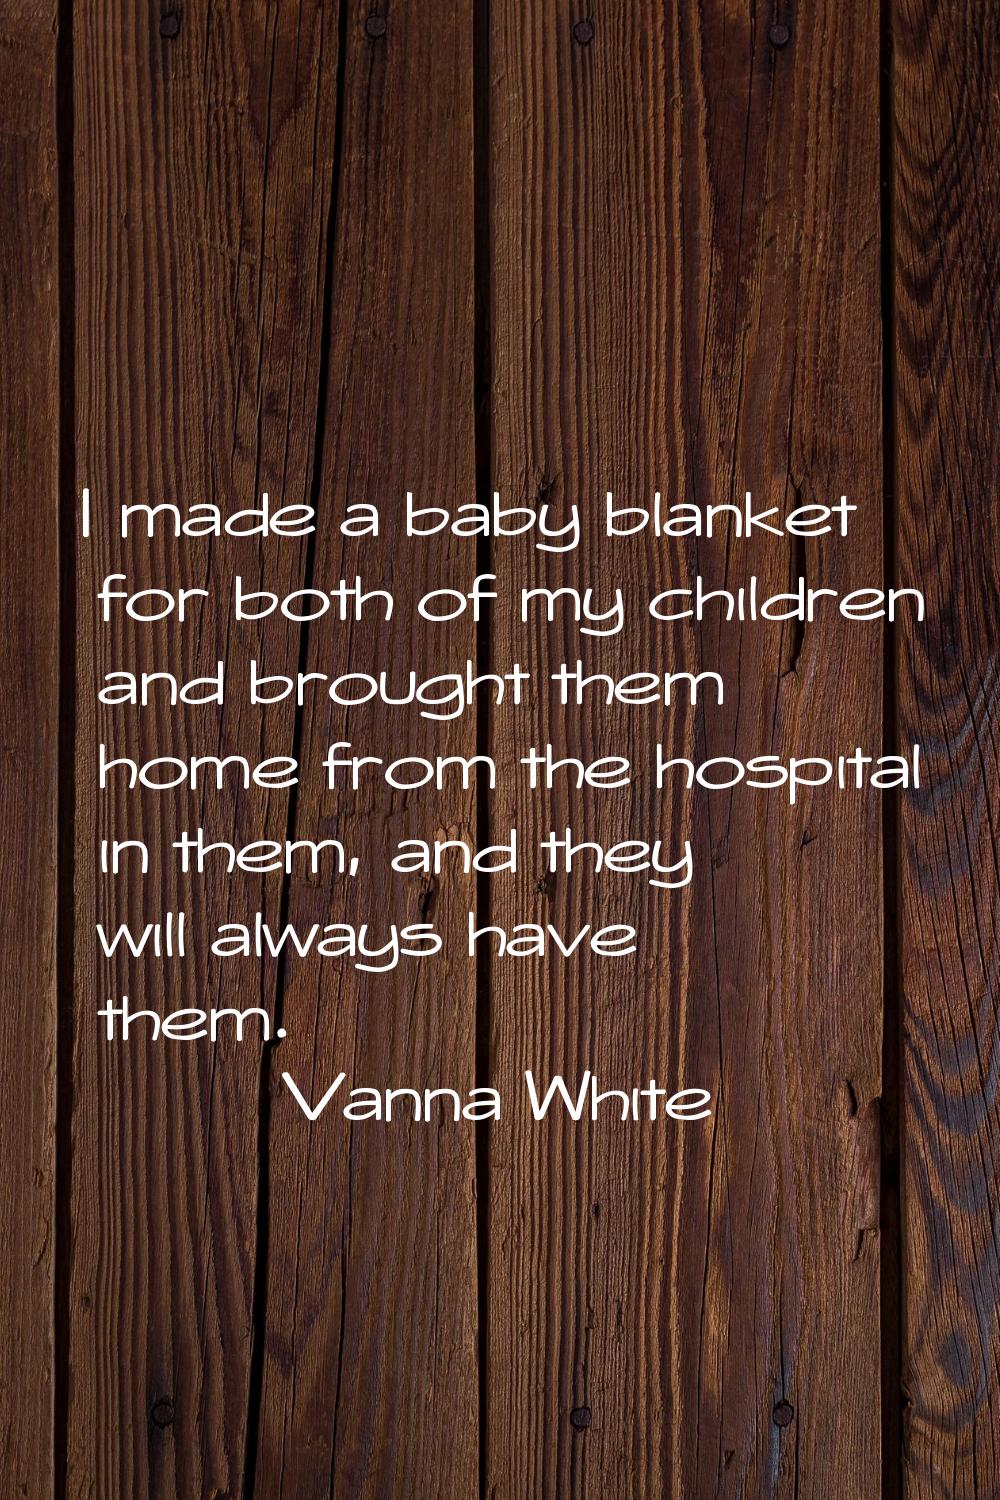 I made a baby blanket for both of my children and brought them home from the hospital in them, and 